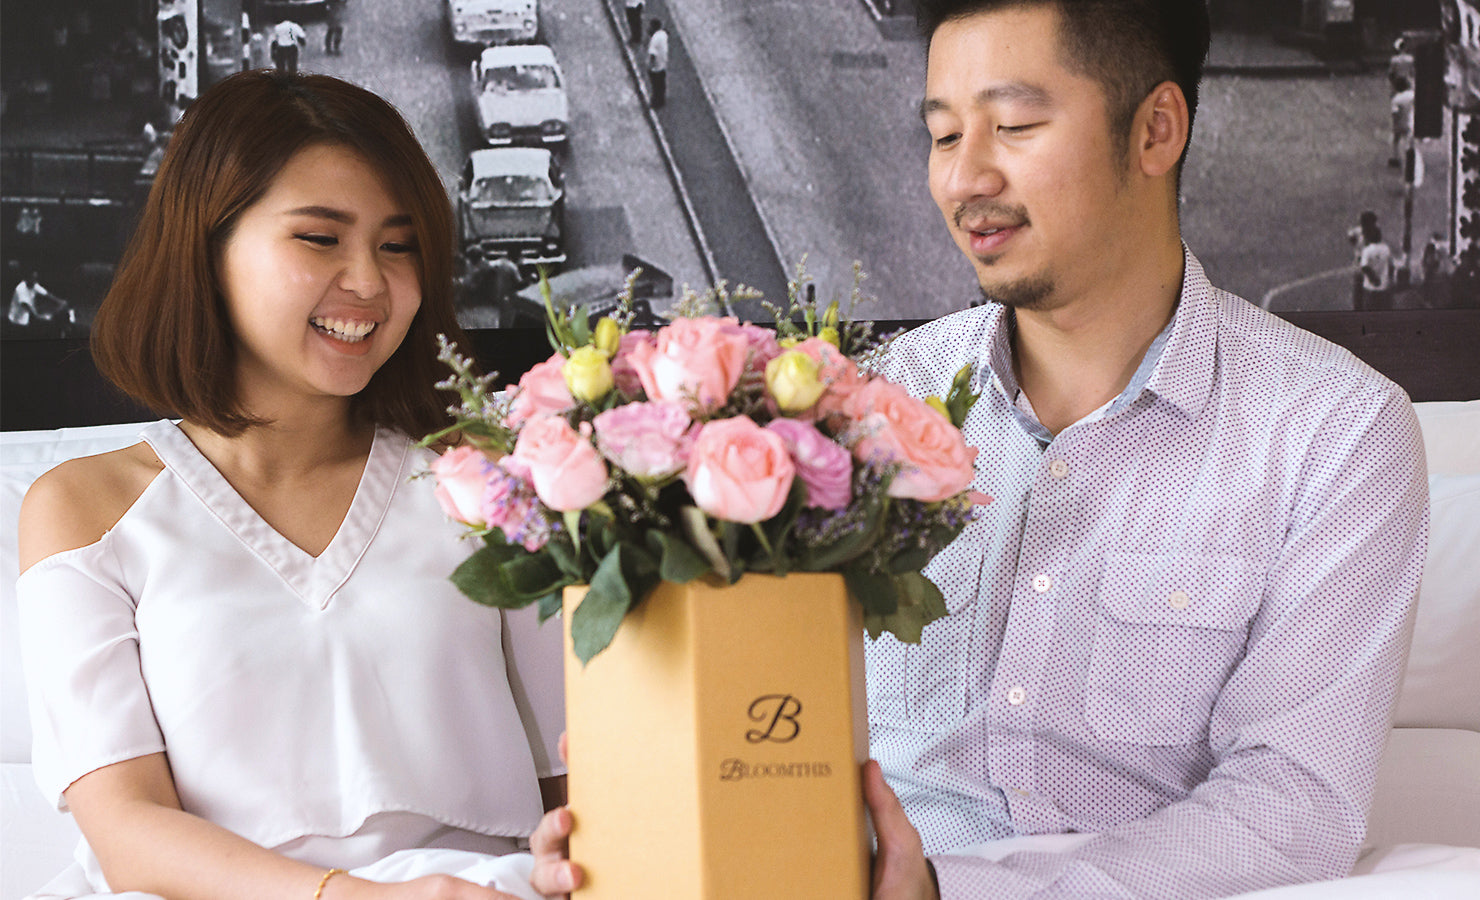 Unfold your love story with Giden Lim & Penny Choo